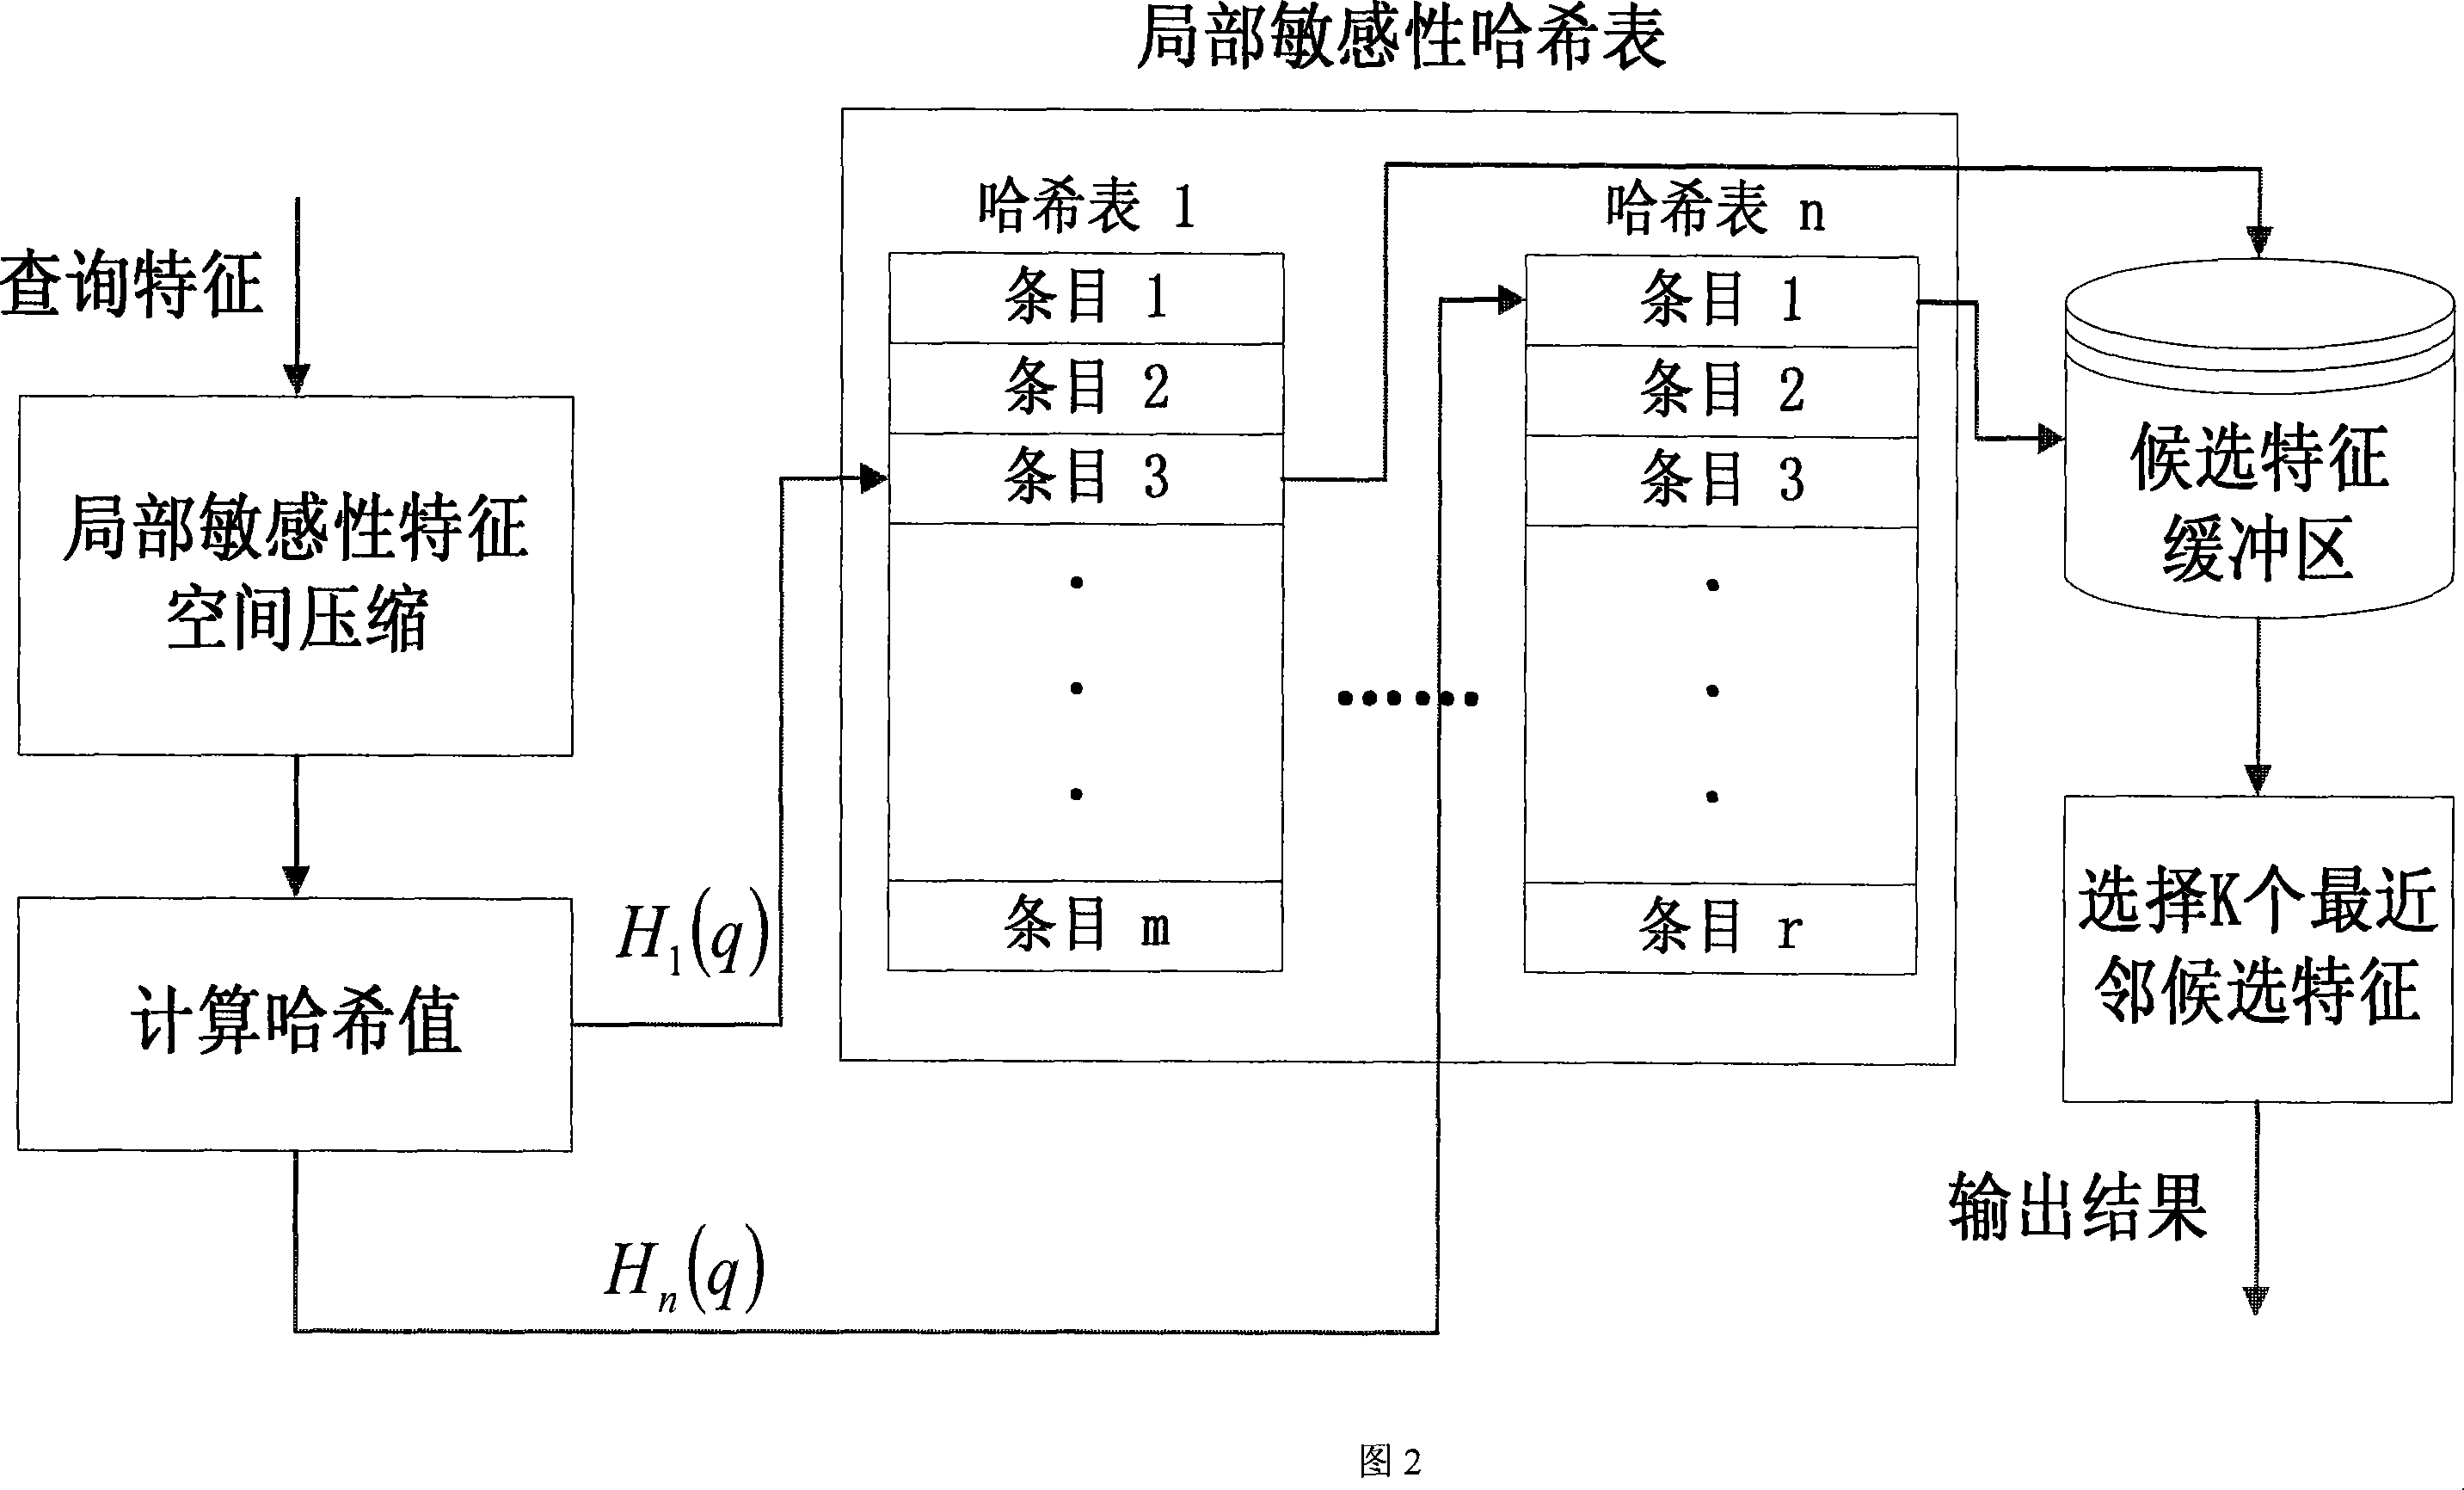 Quick-speed audio advertisement recognition method based on layered matching